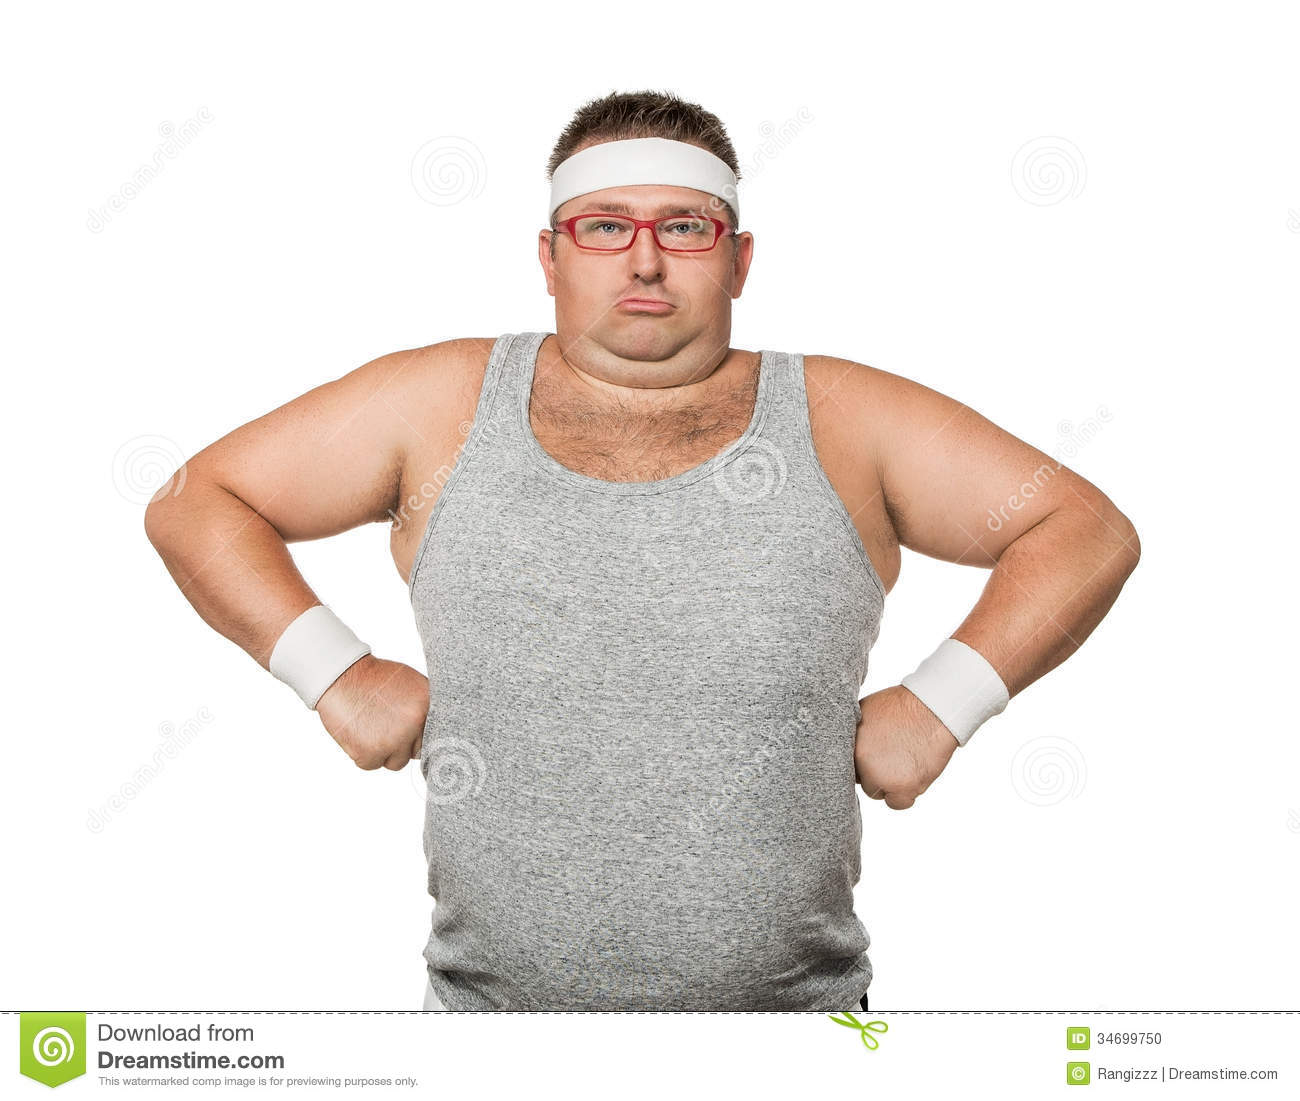 Funny Overweight Man Flexing His Muscle Isolated On White Background